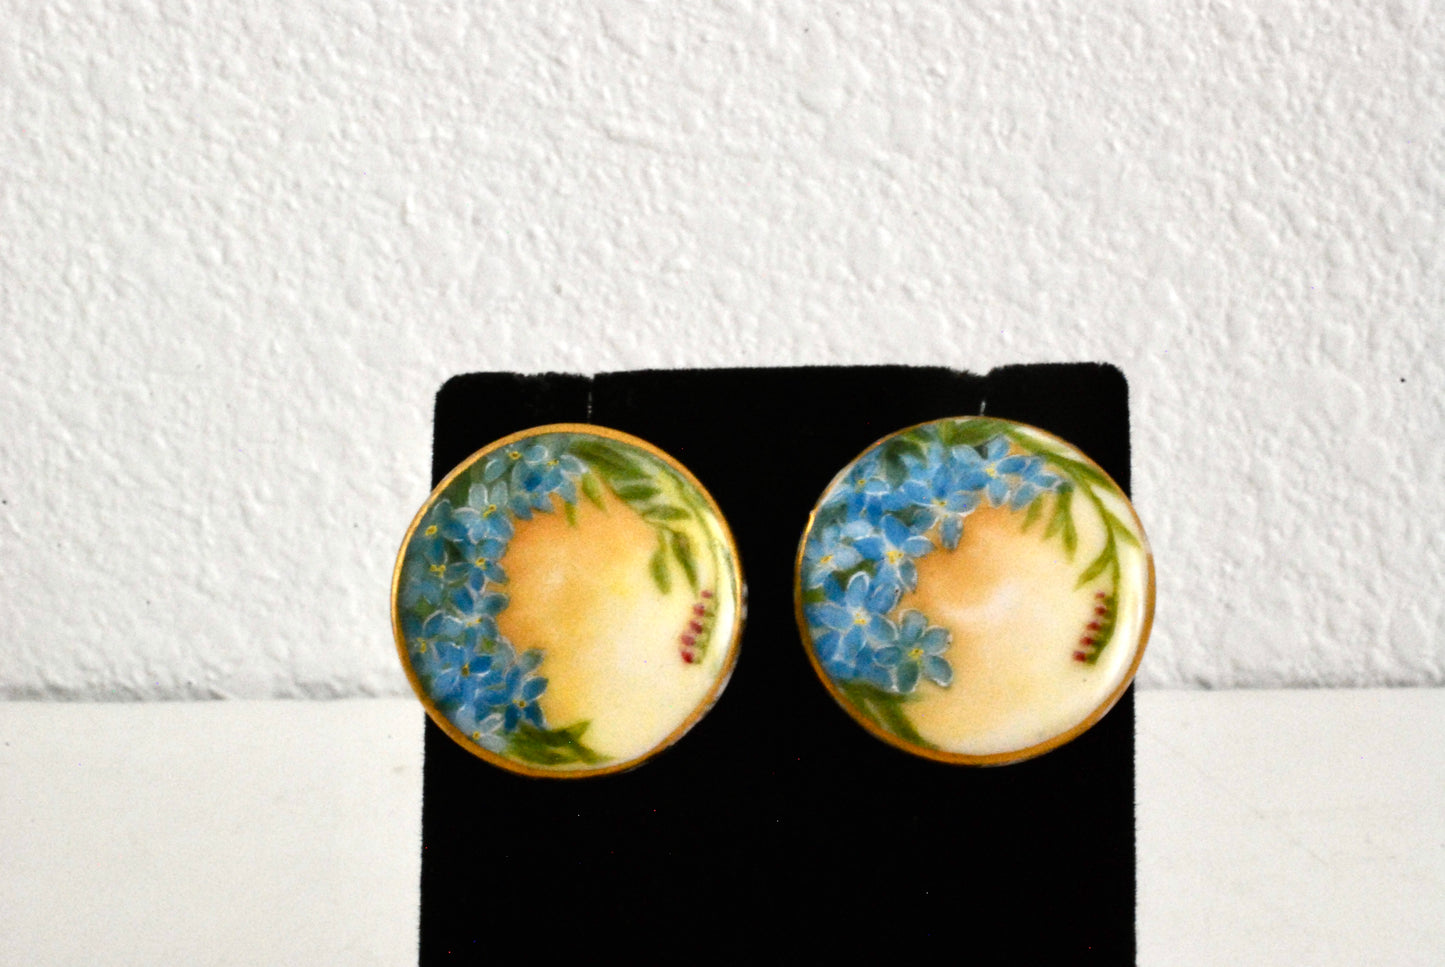 Vintage Porcelain Earrings Hand Painted Forget Me Nots